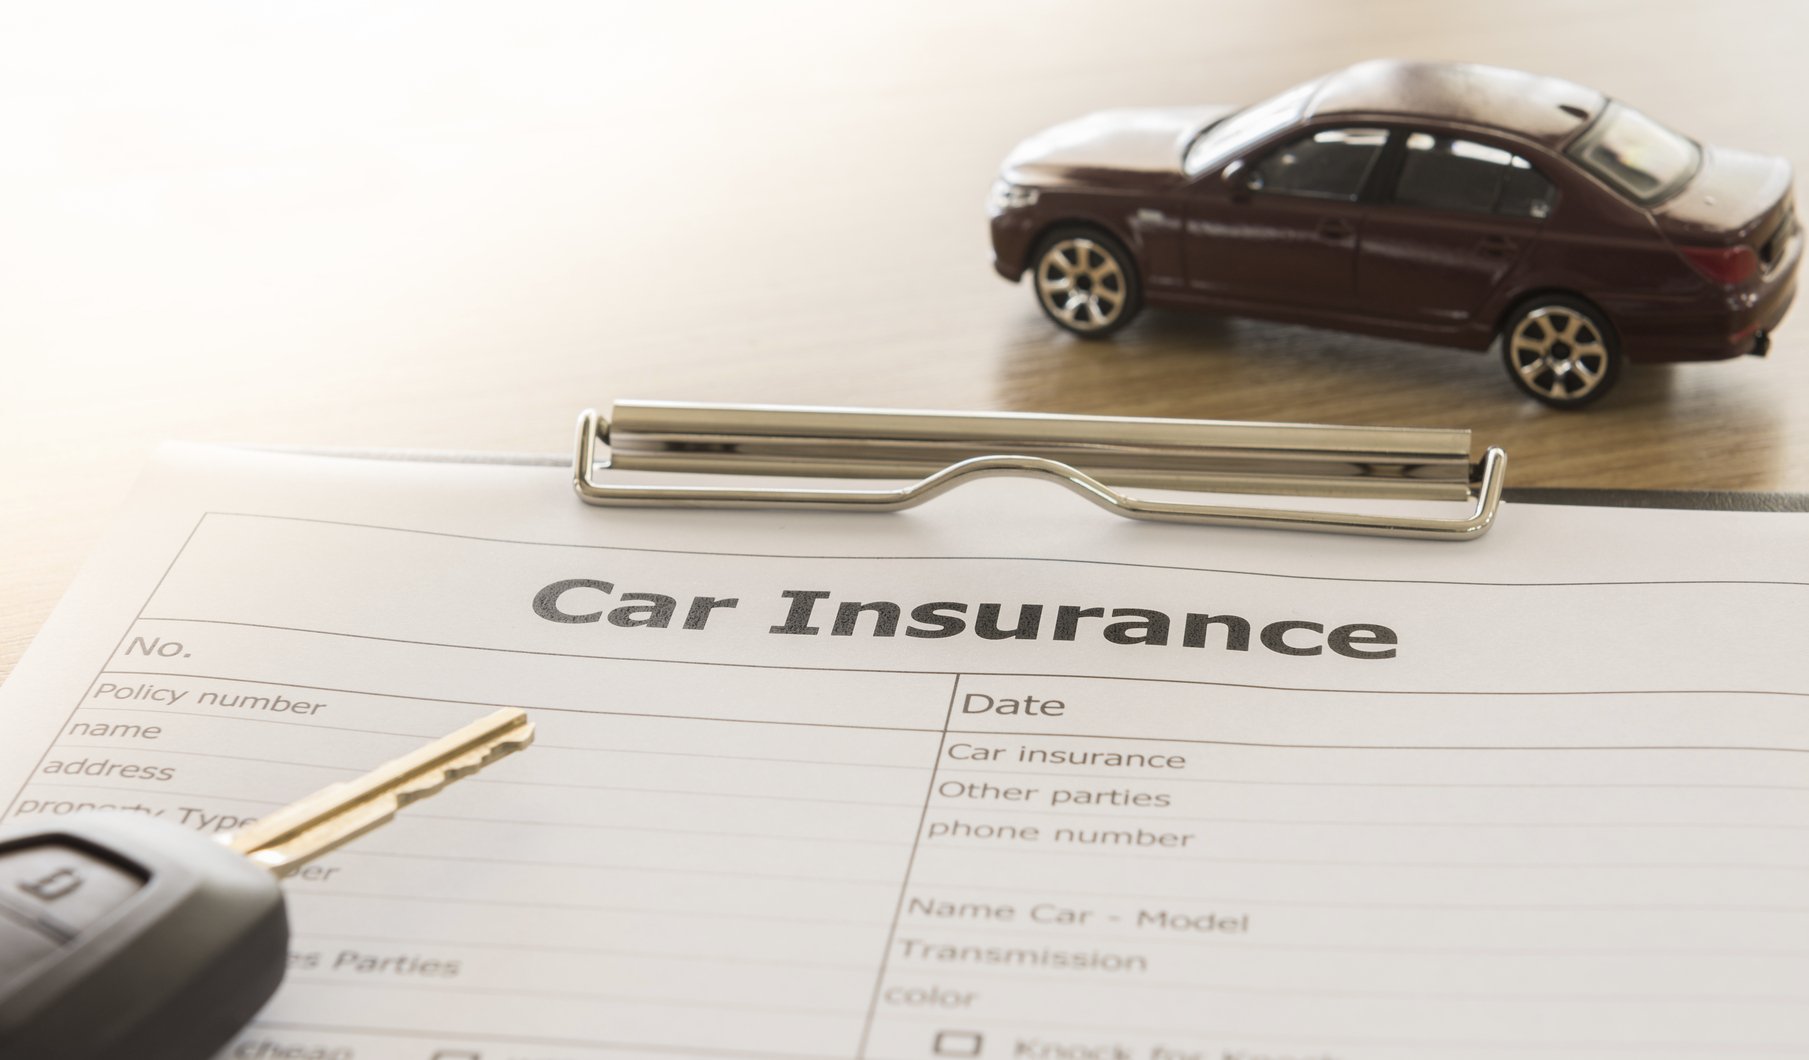 When a private owner sells a vehicle, it's a good idea for that person's interest to follow up on the coverage transfer to the new owner. (Photo: iStock)